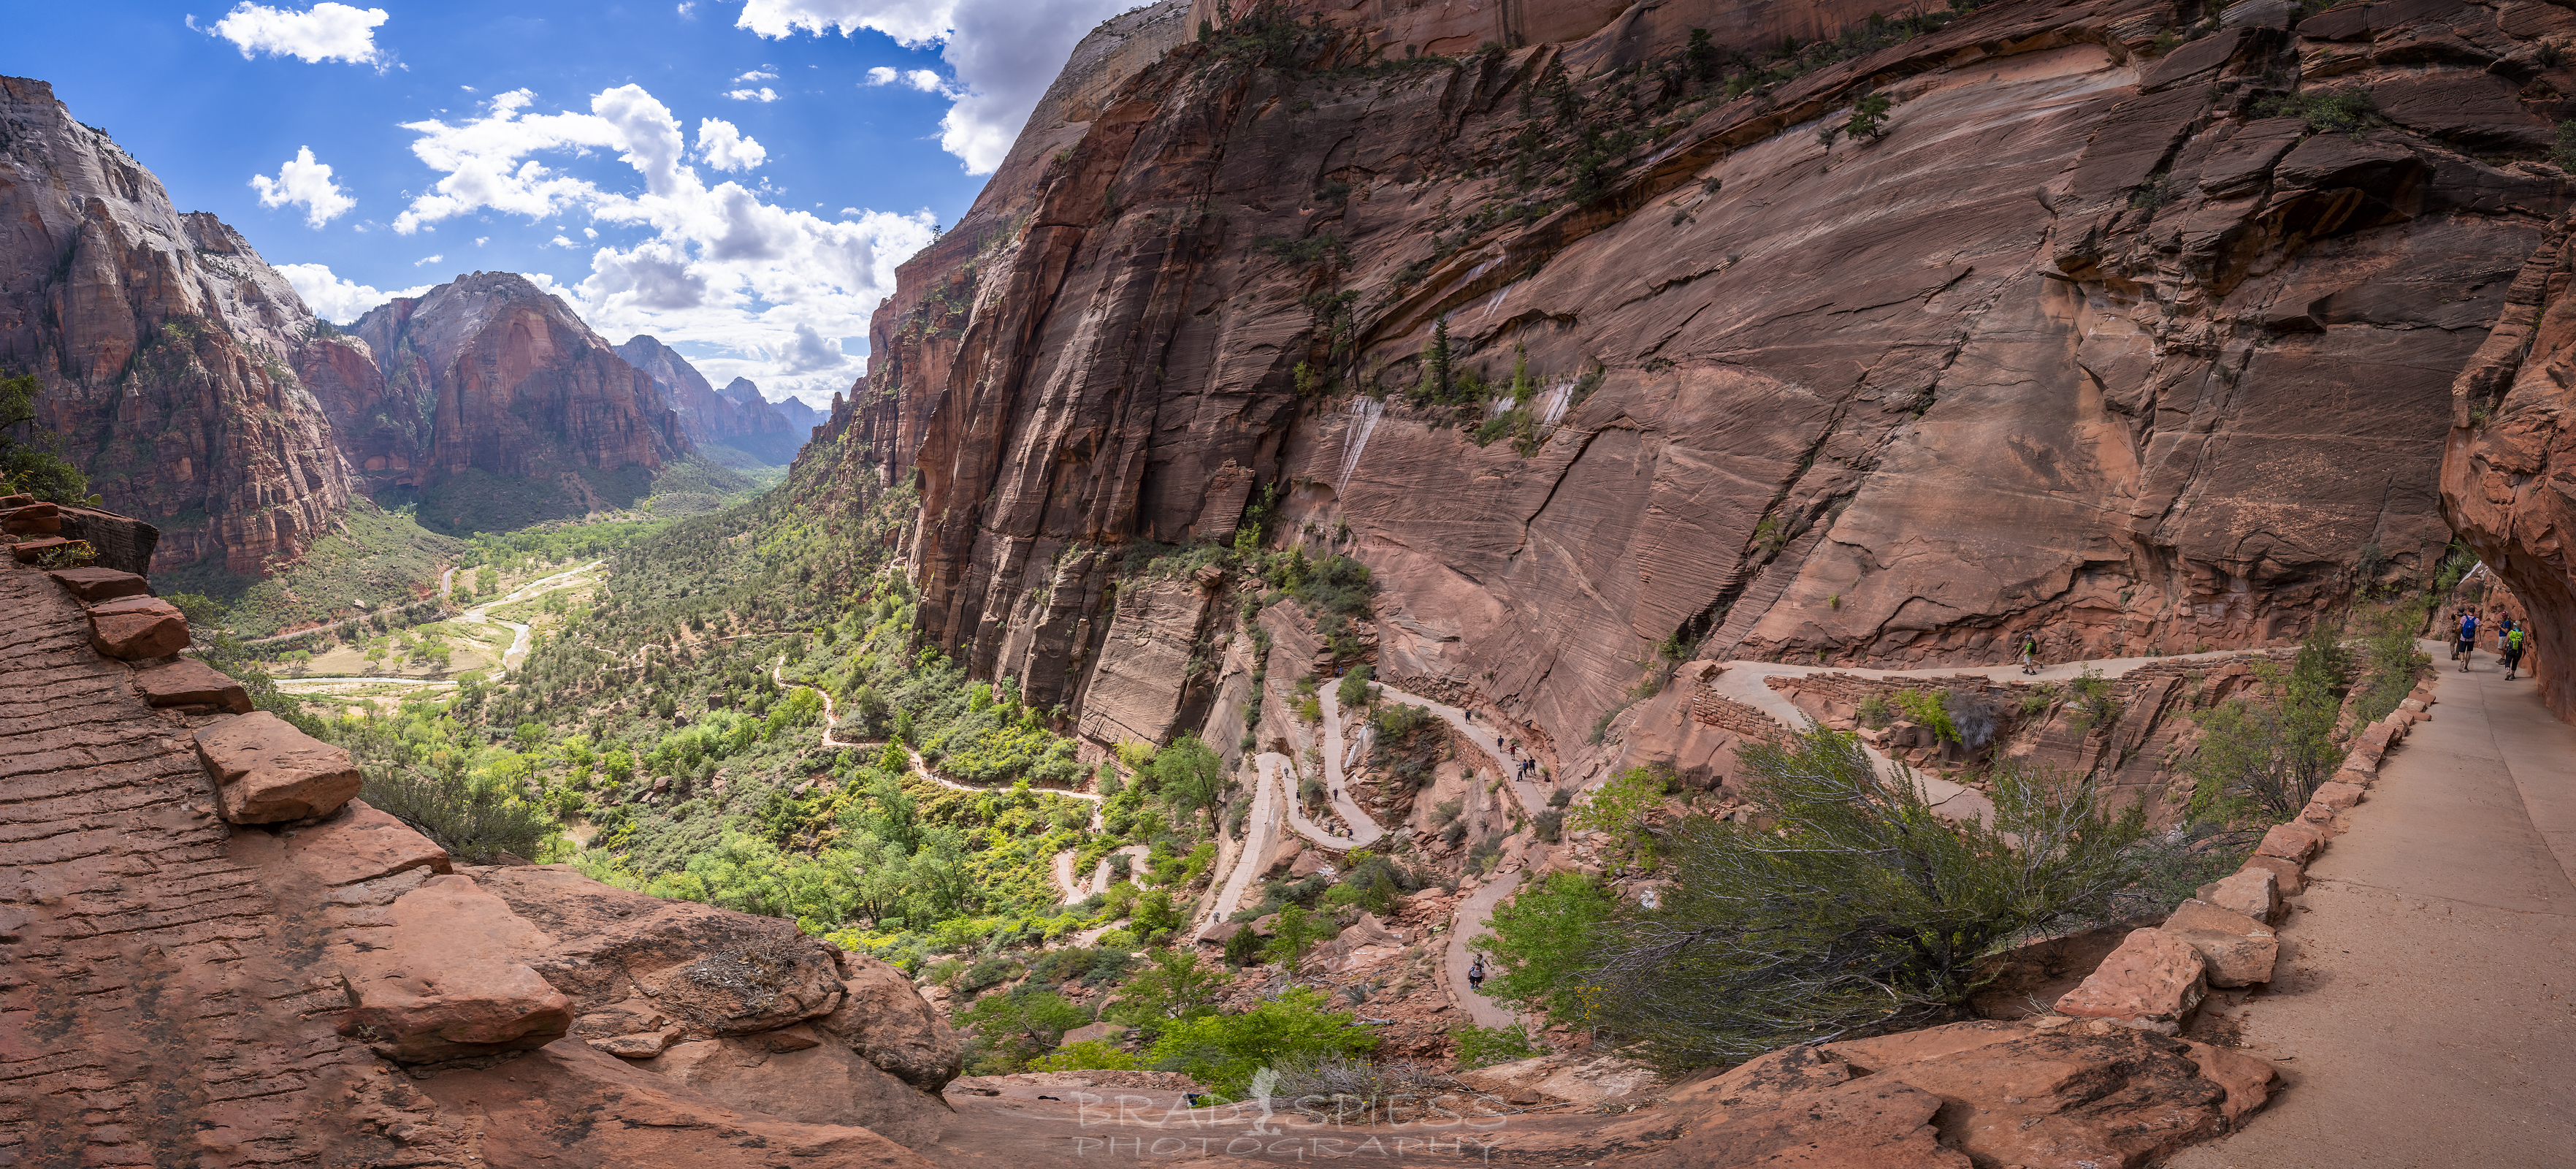 The winding trail leading up towards Angels Landing in Zion National Park